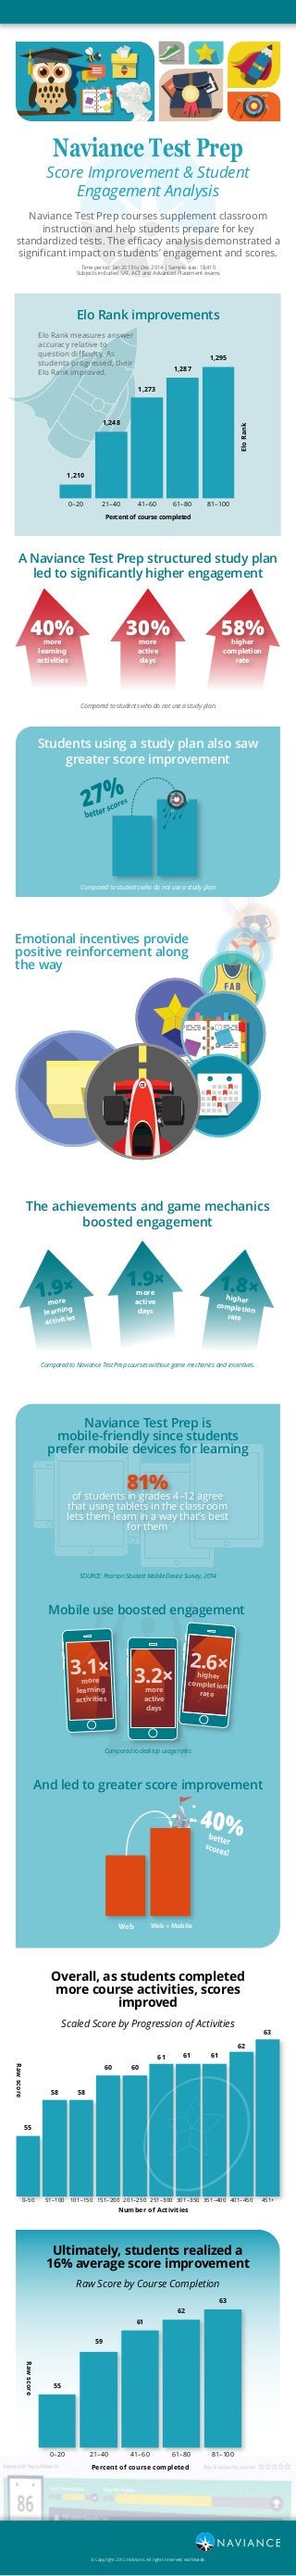 Naviance Test Prep
Score Improvement & Student
Engagement Analysis
A Naviance Test Prep structured study plan
led to signiﬁcantly higher engagement
Compared to students who do not use a study plan.
81–10061–8041–6021–400–20
Percent of course completed
Rawscore
63
62
61
59
55
451+401–450351–400301–350251–300201–250151–200101–15051–1000–50
40%more
learning
activities
30%more
active
days
58%higher
completion
rate
The achievements and game mechanics
boosted engagement
Compared to Naviance Test Prep courses without game mechanics and incentives.
1.9×
more
learning
activities
1.9×more
active
days
1.8×higher
completion
rate
10
Emotional incentives provide
positive reinforcement along
the way
Naviance Test Prep courses supplement classroom
instruction and help students prepare for key
standardized tests. The eﬃcacy analysis demonstrated a
signiﬁcant impact on students’ engagement and scores.
Time period: Jan 2013 to Dec 2014 | Sample size: 18,410
Subjects included SAT, ACT and Advanced Placement exams
0–20 21–40 41–60 61–80 81–100
1,210
1,248
1,273
1,287
1,295
Percent of course completed
EloRank
Elo Rank measures answer
accuracy relative to
question diﬃculty. As
students progressed, their
Elo Rank improved.
Students using a study plan also saw
greater score improvement
Naviance Test Prep is
mobile-friendly since students
prefer mobile devices for learning
Overall, as students completed
more course activities, scores
improved
Scaled Score by Progression of Activities
Ultimately, students realized a
16% average score improvement
Raw Score by Course Completion
81%
of students in grades 4–12 agree
that using tablets in the classroom
lets them learn in a way that’s best
for them
SOURCE: Pearson Student Mobile Device Survey, 2014
Compared to desktop usage rates
Mobile use boosted engagement
3.1×more
learning
activities
3.2×more
active
days
2.6×higher
completion
rate
And led to greater score improvement
Web Web + Mobile
55
58 58
60 60
61 61 61
62
63
Number of Activities
© Copyright 2015 Hobsons. All rights reserved worldwide.
Elo Rank improvements
Compared to students who do not use a study plan
Rawscore
 